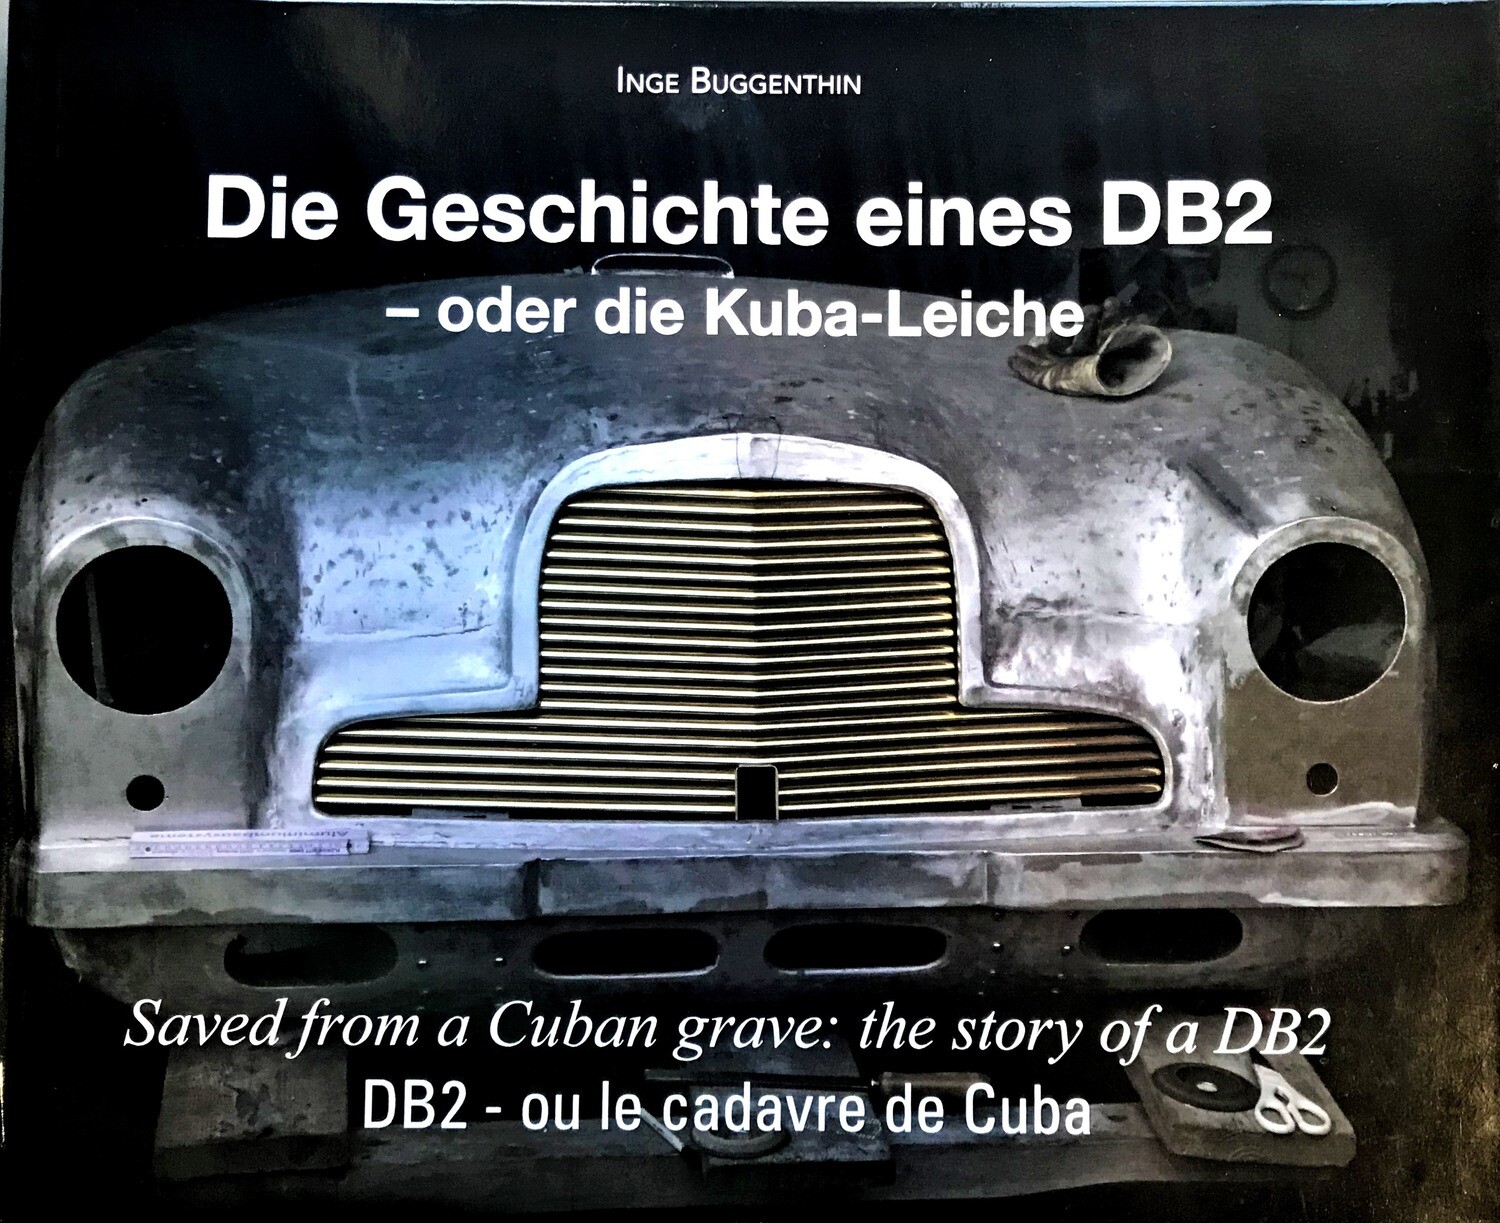 Book: "The Story of a DB2"